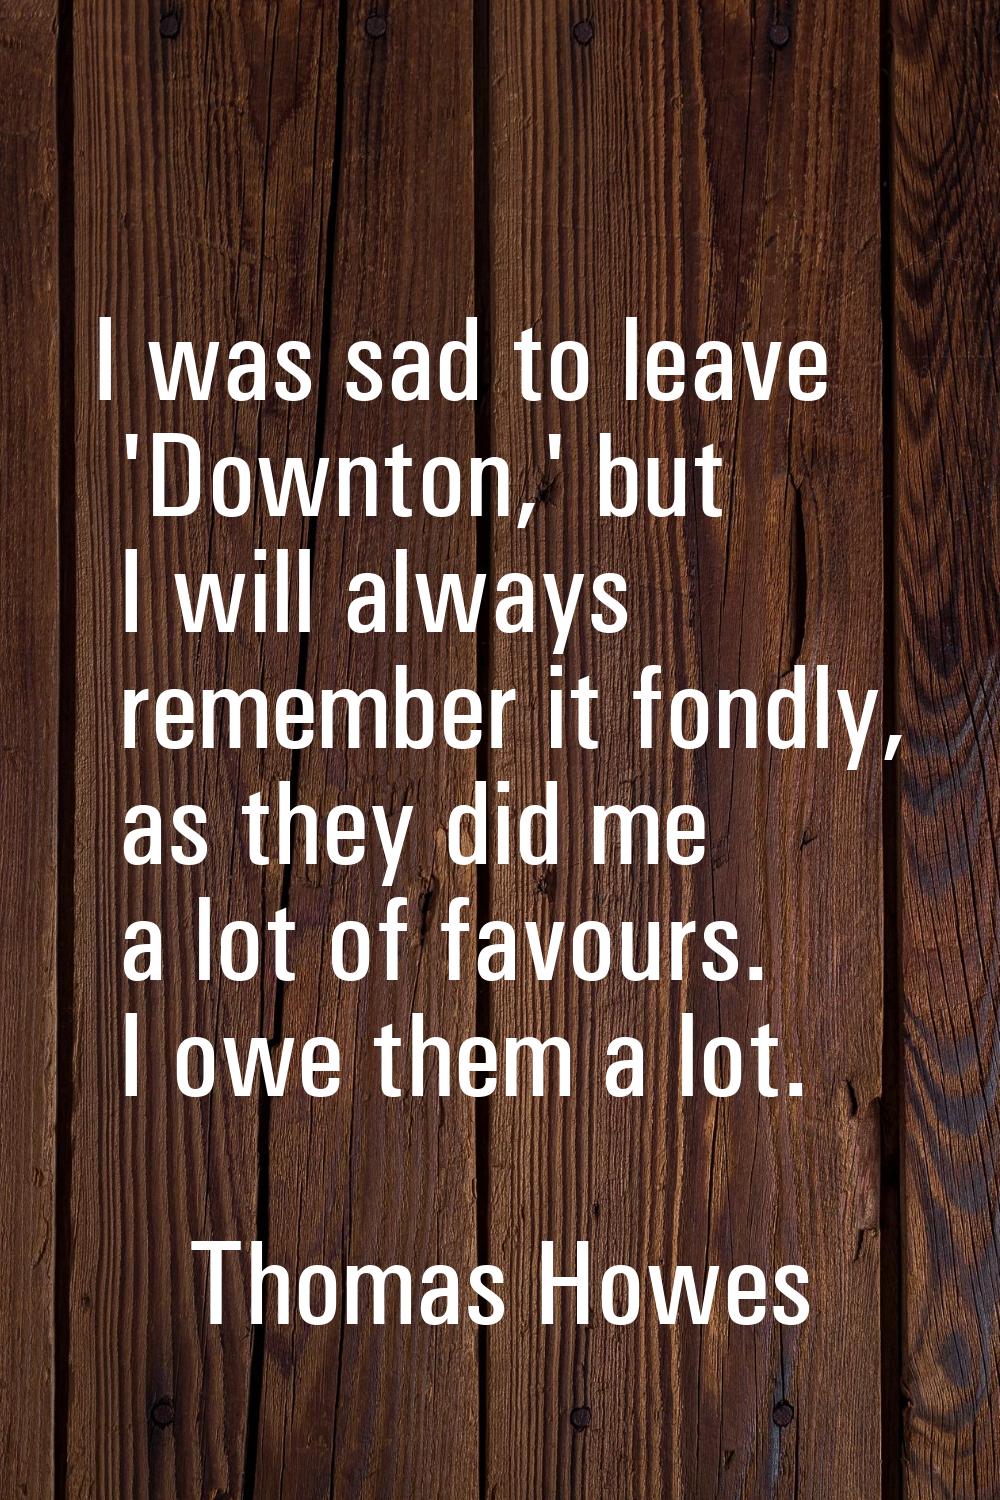 I was sad to leave 'Downton,' but I will always remember it fondly, as they did me a lot of favours